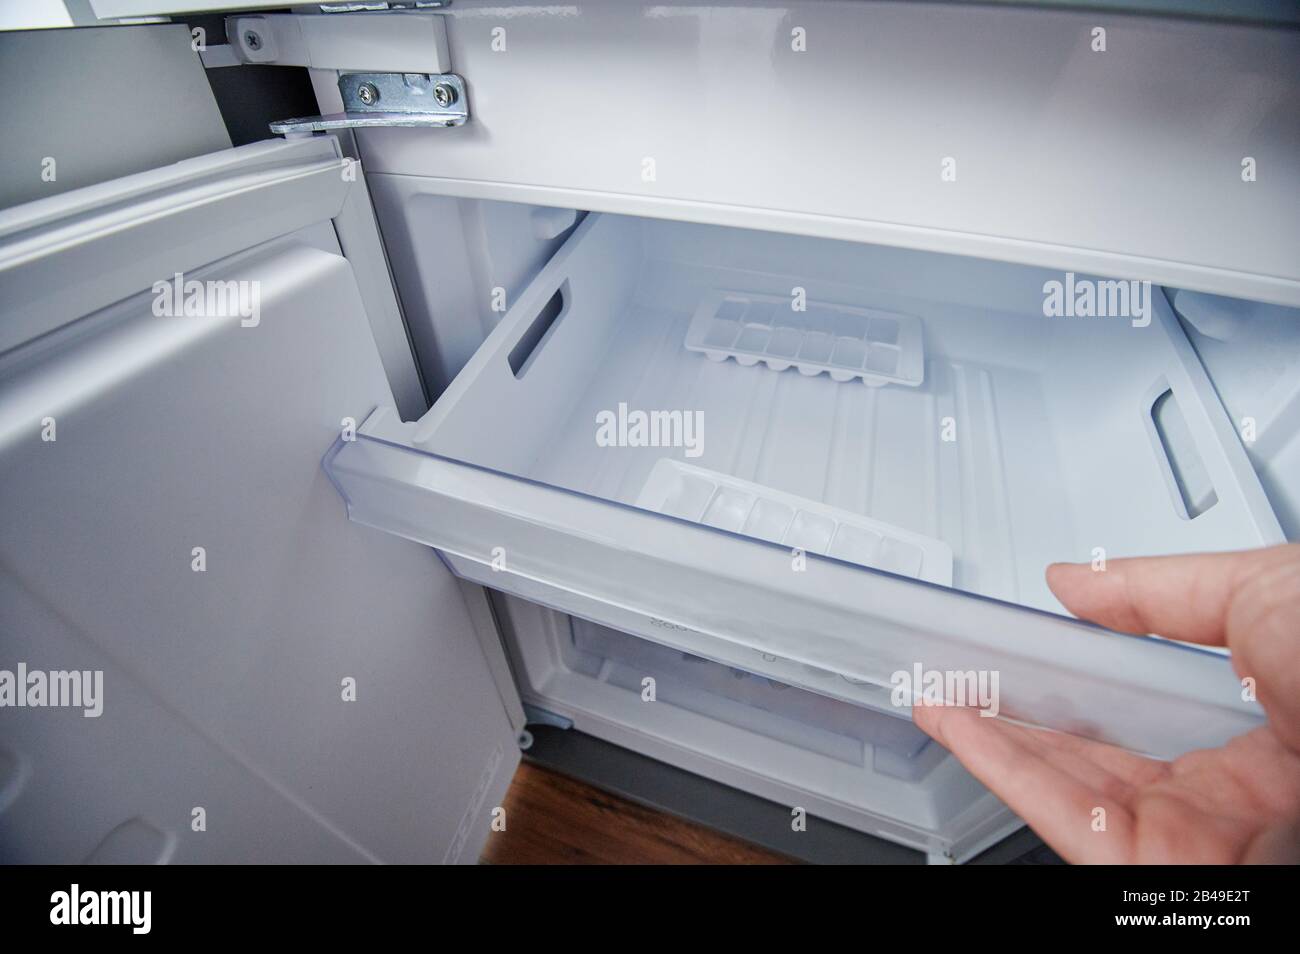 Open clean fridge freezer container with ice cubes Stock Photo